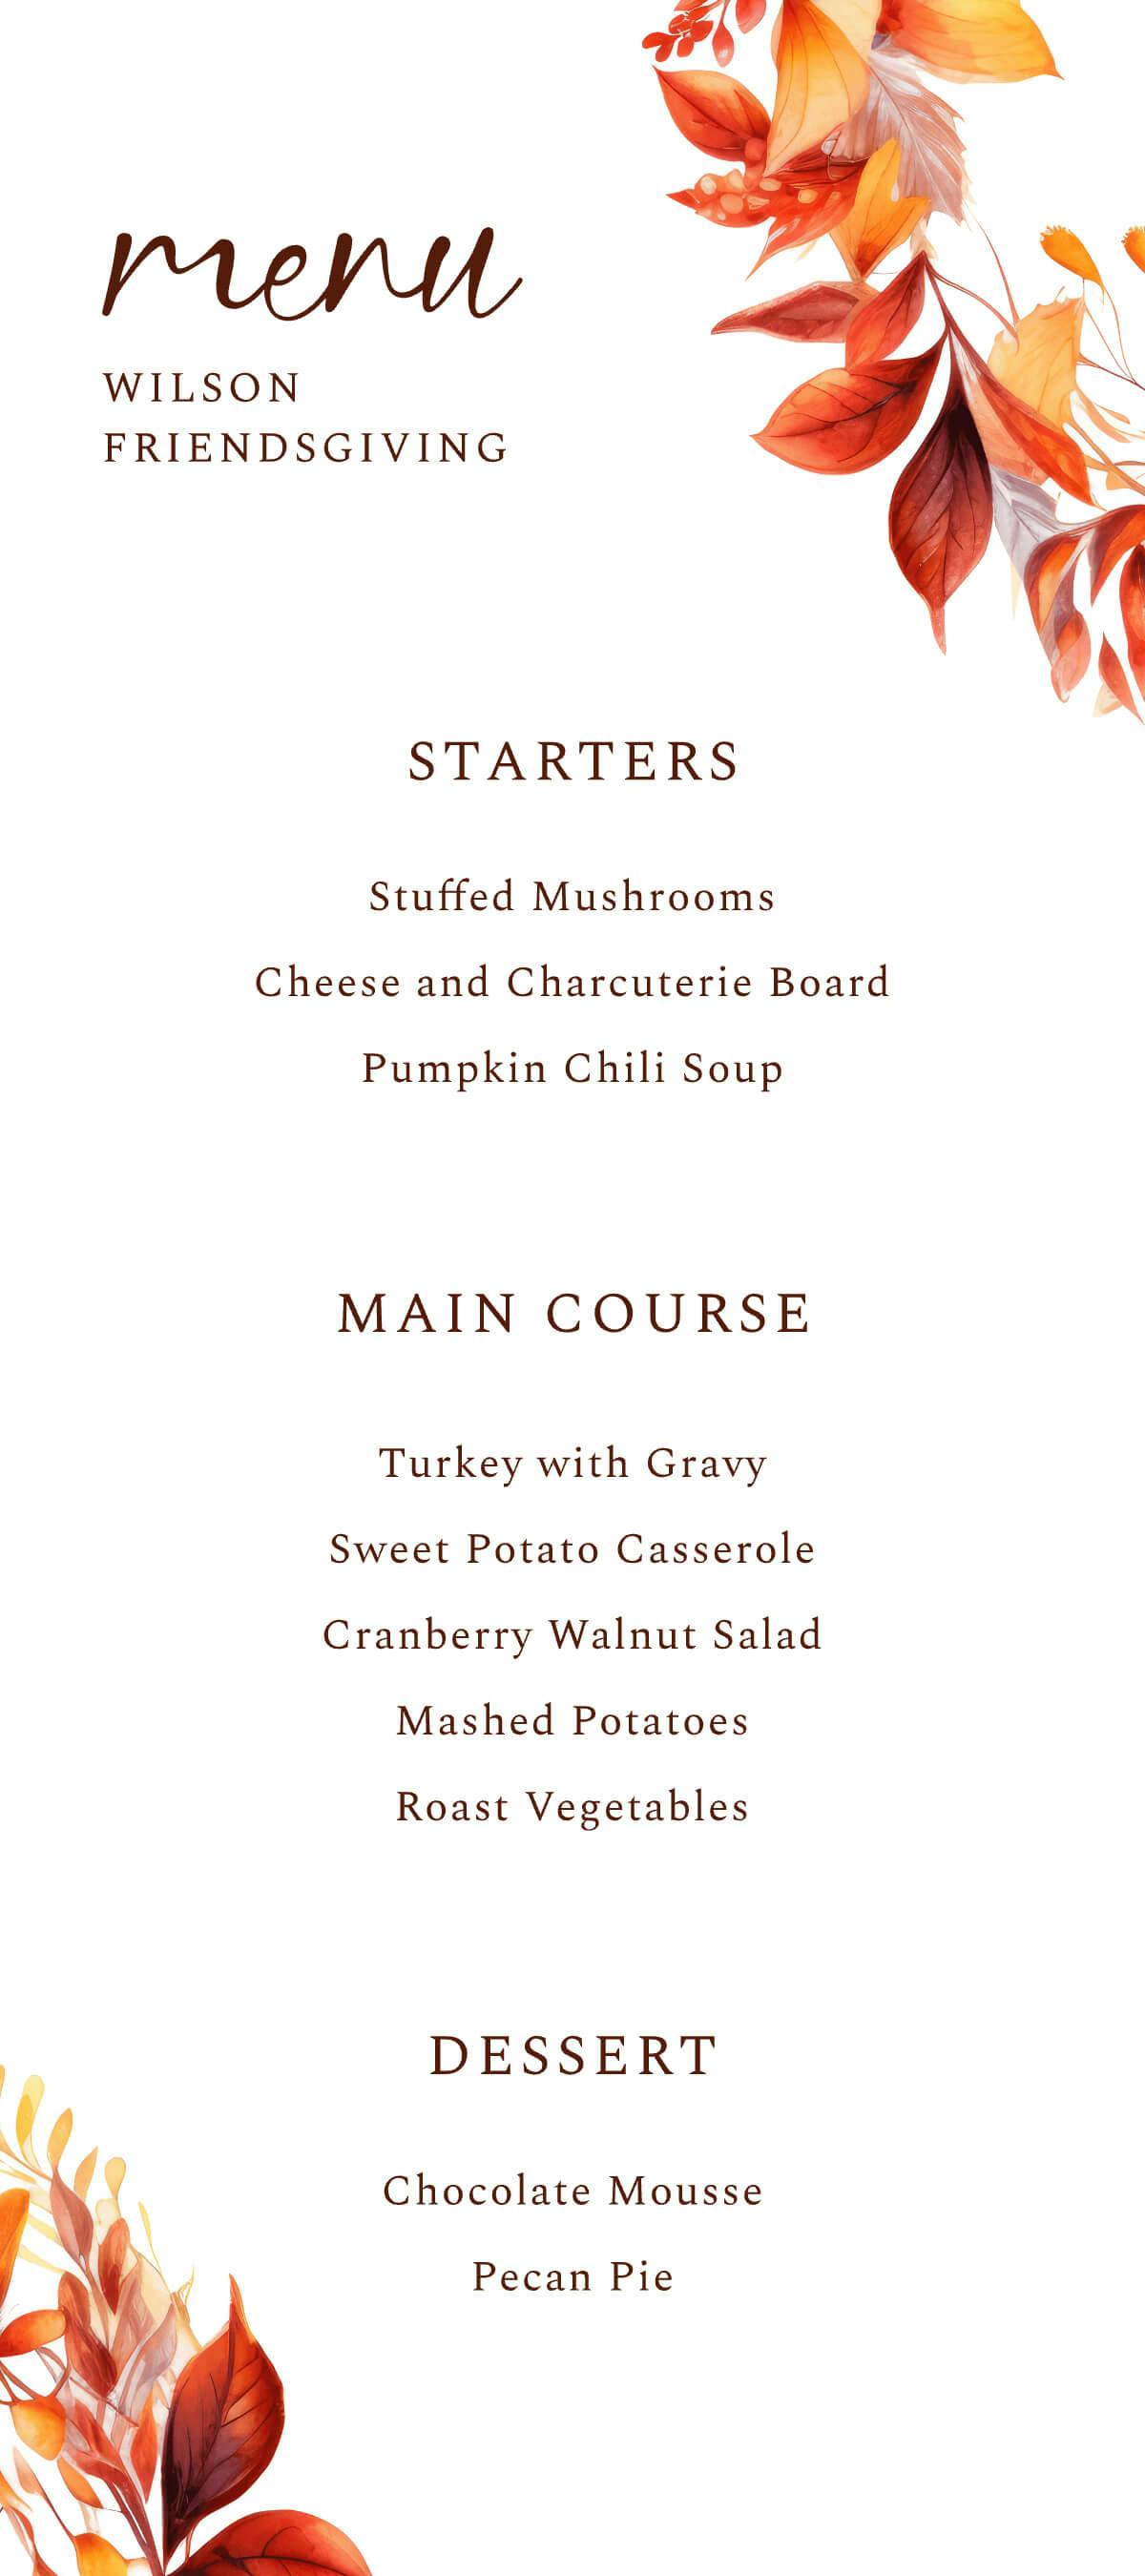 How To Make Thanksgiving Menu Templates To Sell On Etsy (Or Print At ...